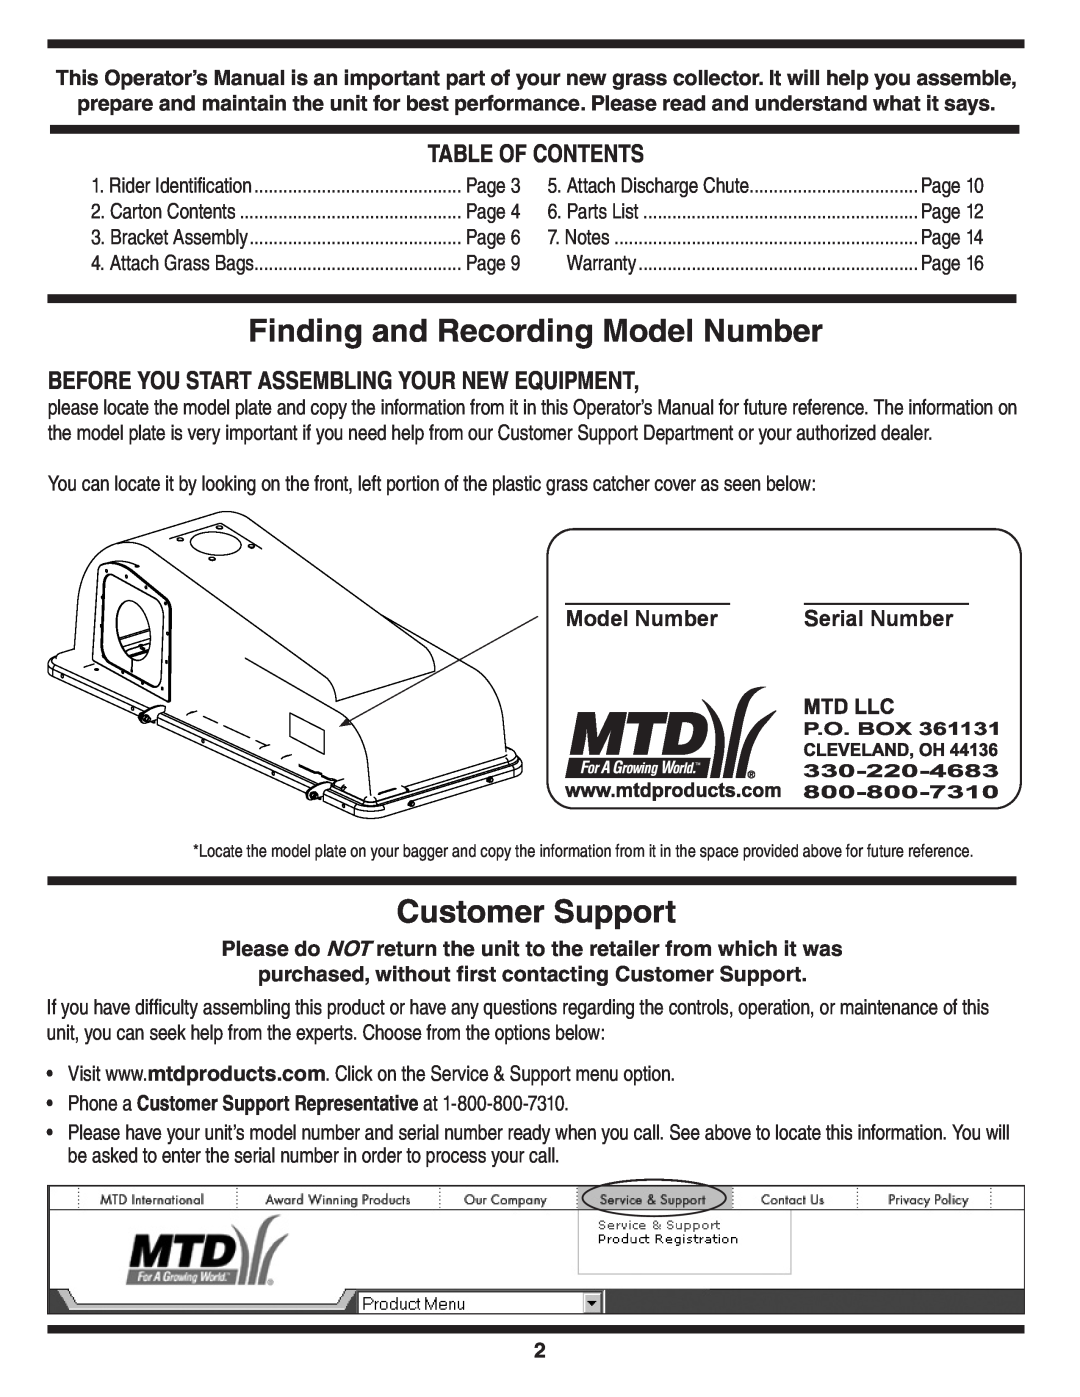 MTD OHD 190-180 warranty Finding and Recording Model Number, Customer Support, Table Of Contents, Serial Number 